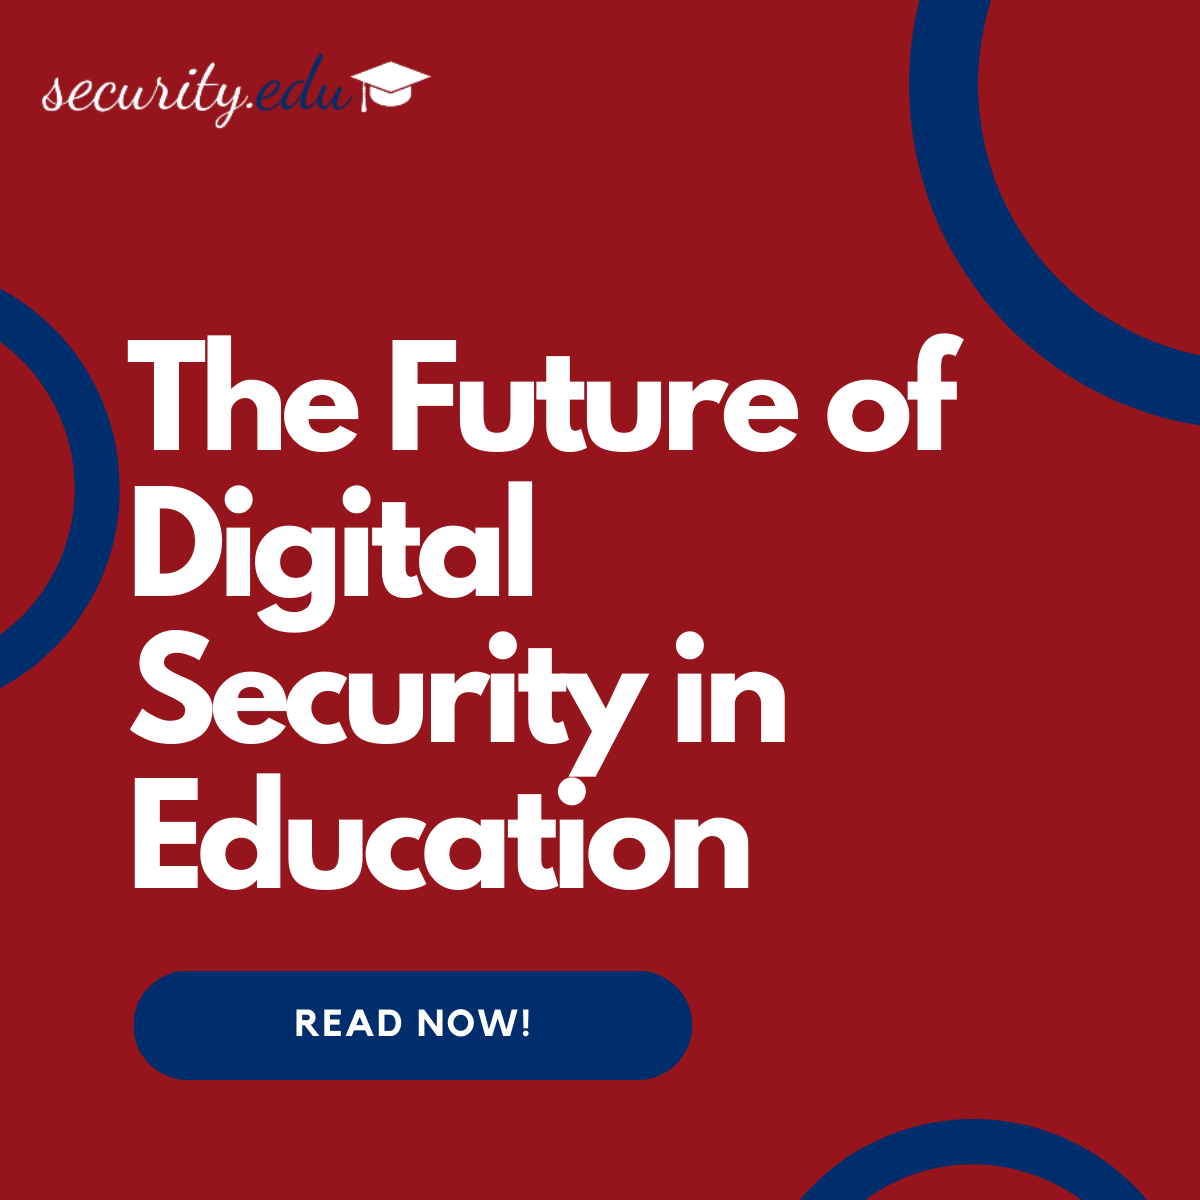 Featured image for “The Future of Digital Security in Education”